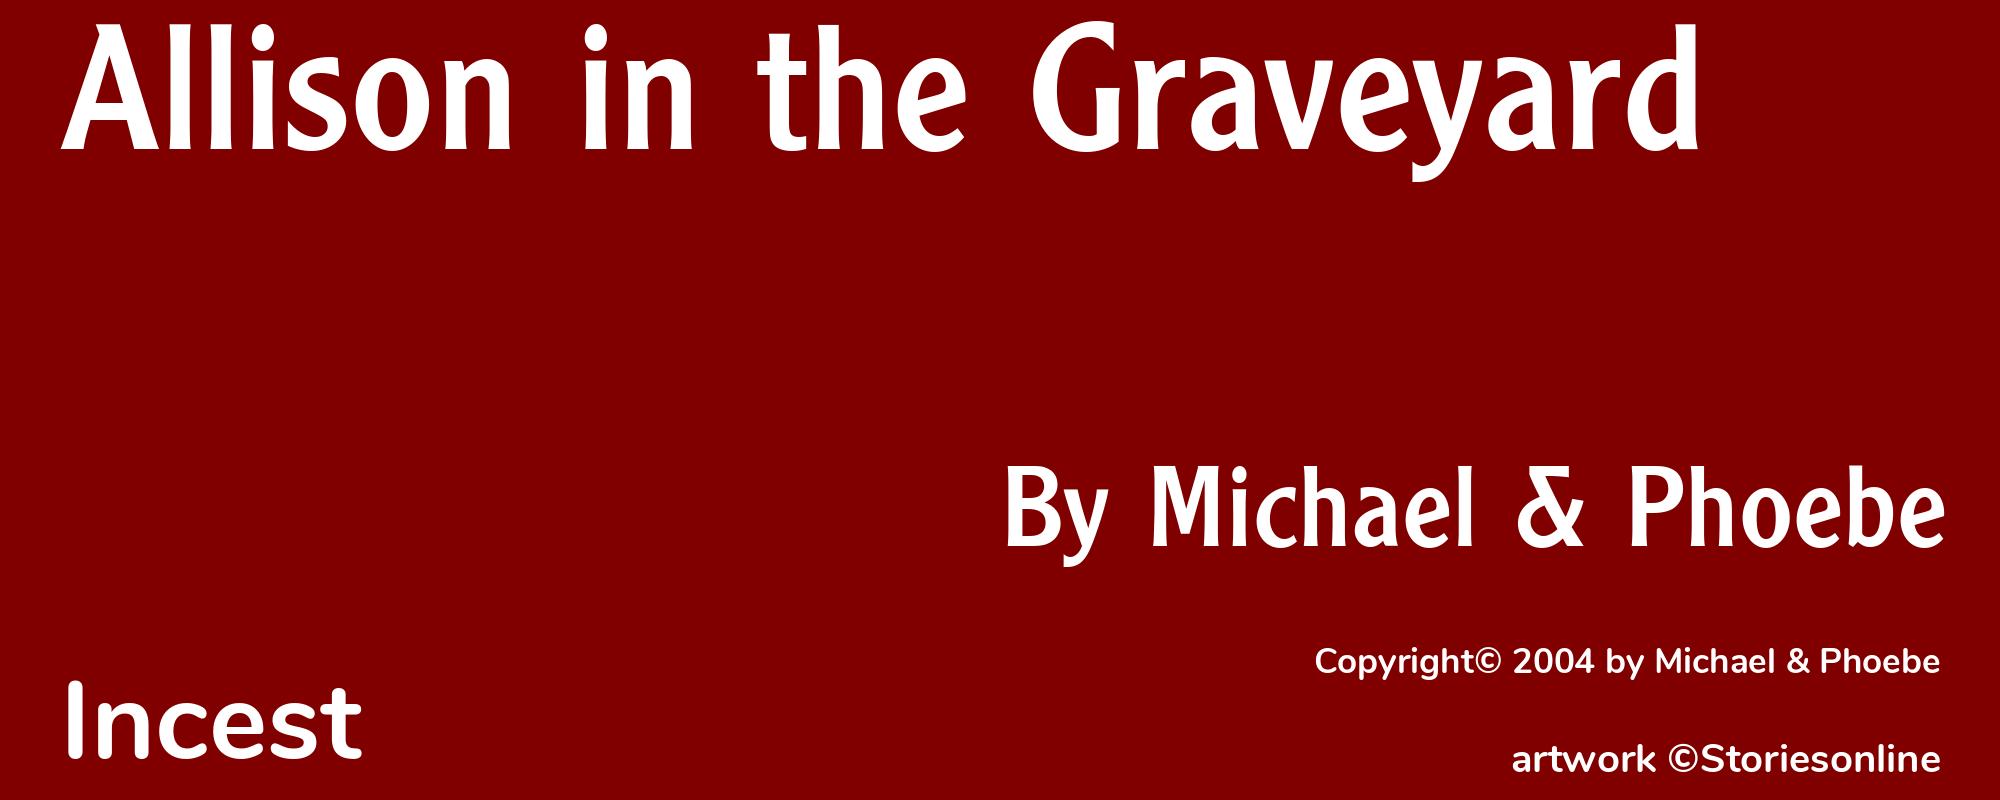 Allison in the Graveyard - Cover